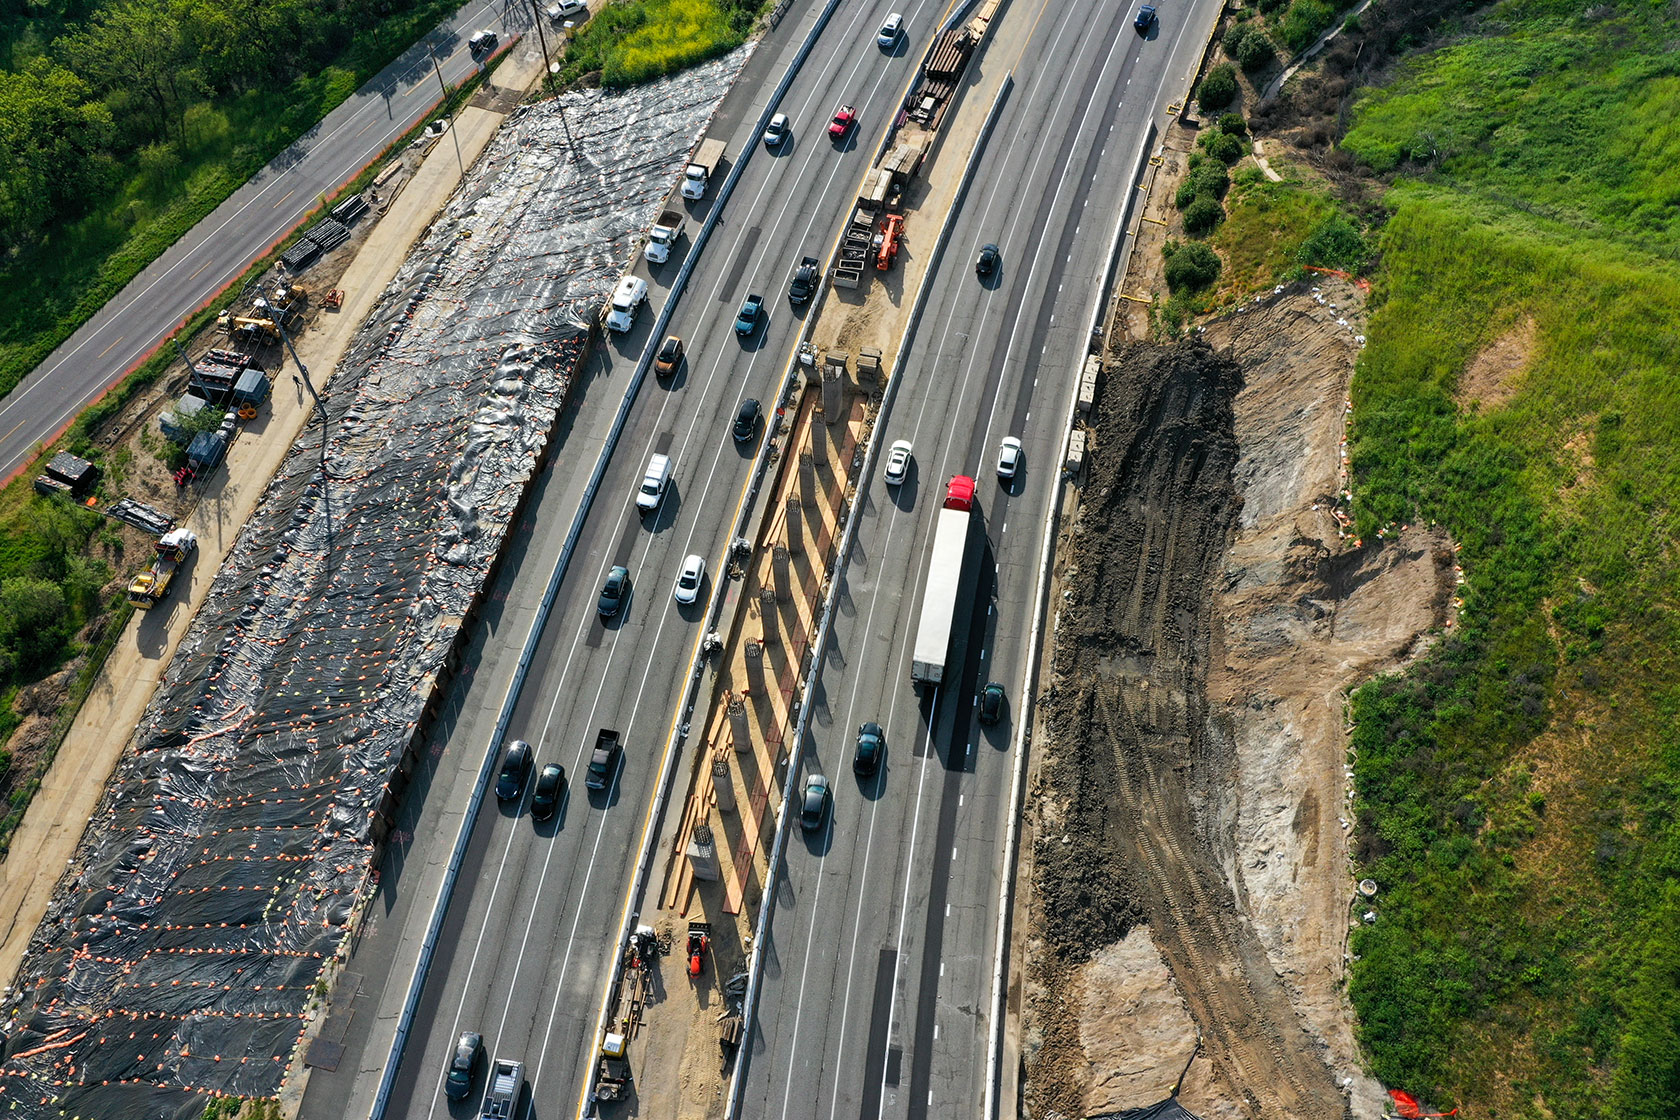 Photo shows an aerial shot of several highway lanes laid down amid rural open land, with cars and trucks driving on both sides